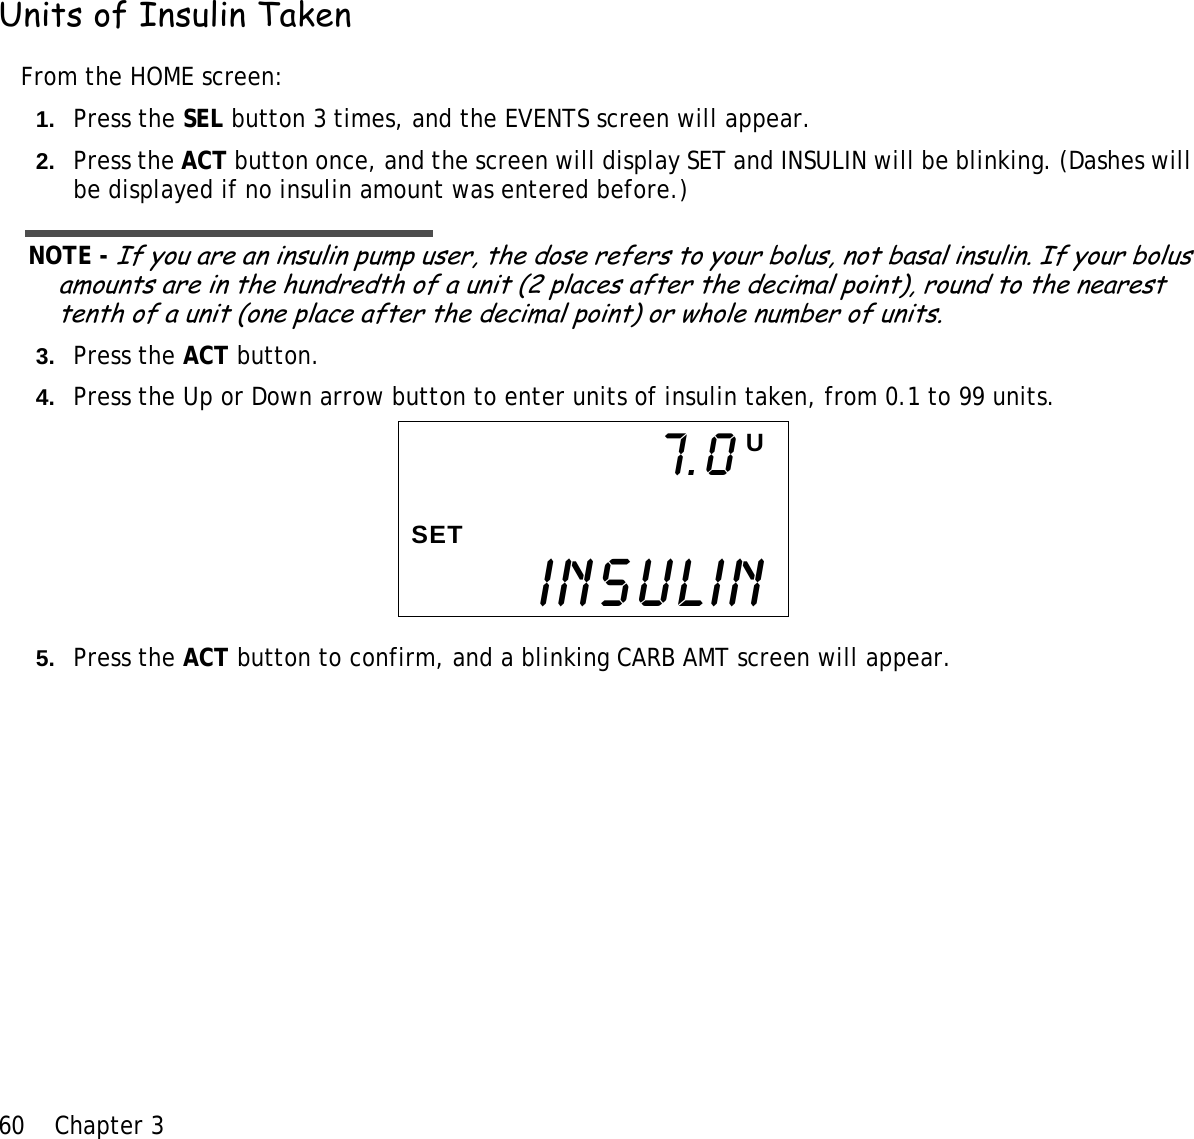 60 Chapter 3 Units of Insulin TakenFrom the HOME screen:1. Press the SEL button 3 times, and the EVENTS screen will appear.2. Press the ACT button once, and the screen will display SET and INSULIN will be blinking. (Dashes will be displayed if no insulin amount was entered before.)NOTE - If you are an insulin pump user, the dose refers to your bolus, not basal insulin. If your bolus amounts are in the hundredth of a unit (2 places after the decimal point), round to the nearest tenth of a unit (one place after the decimal point) or whole number of units. 3. Press the ACT button.4. Press the Up or Down arrow button to enter units of insulin taken, from 0.1 to 99 units.5. Press the ACT button to confirm, and a blinking CARB AMT screen will appear.INSULIN7.0 USET